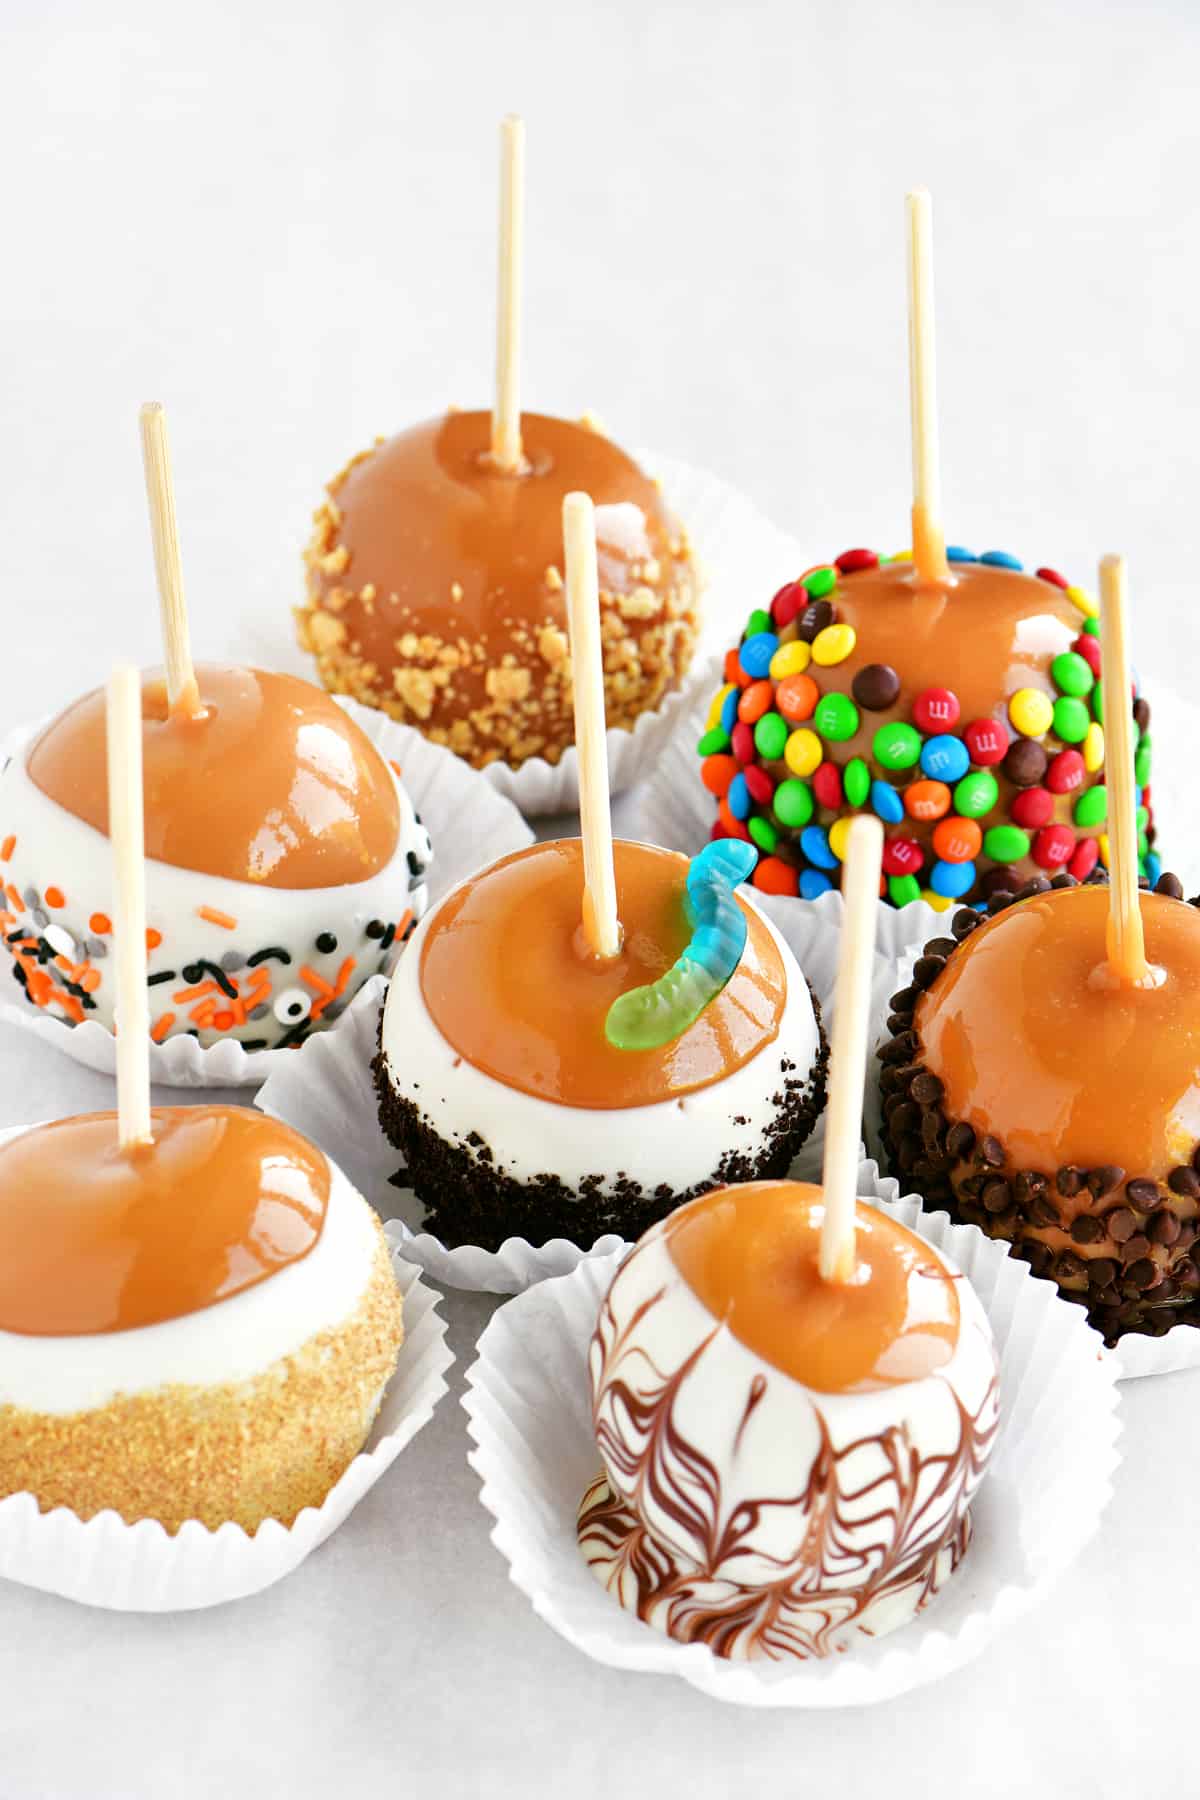 Caramel apples with toppings.